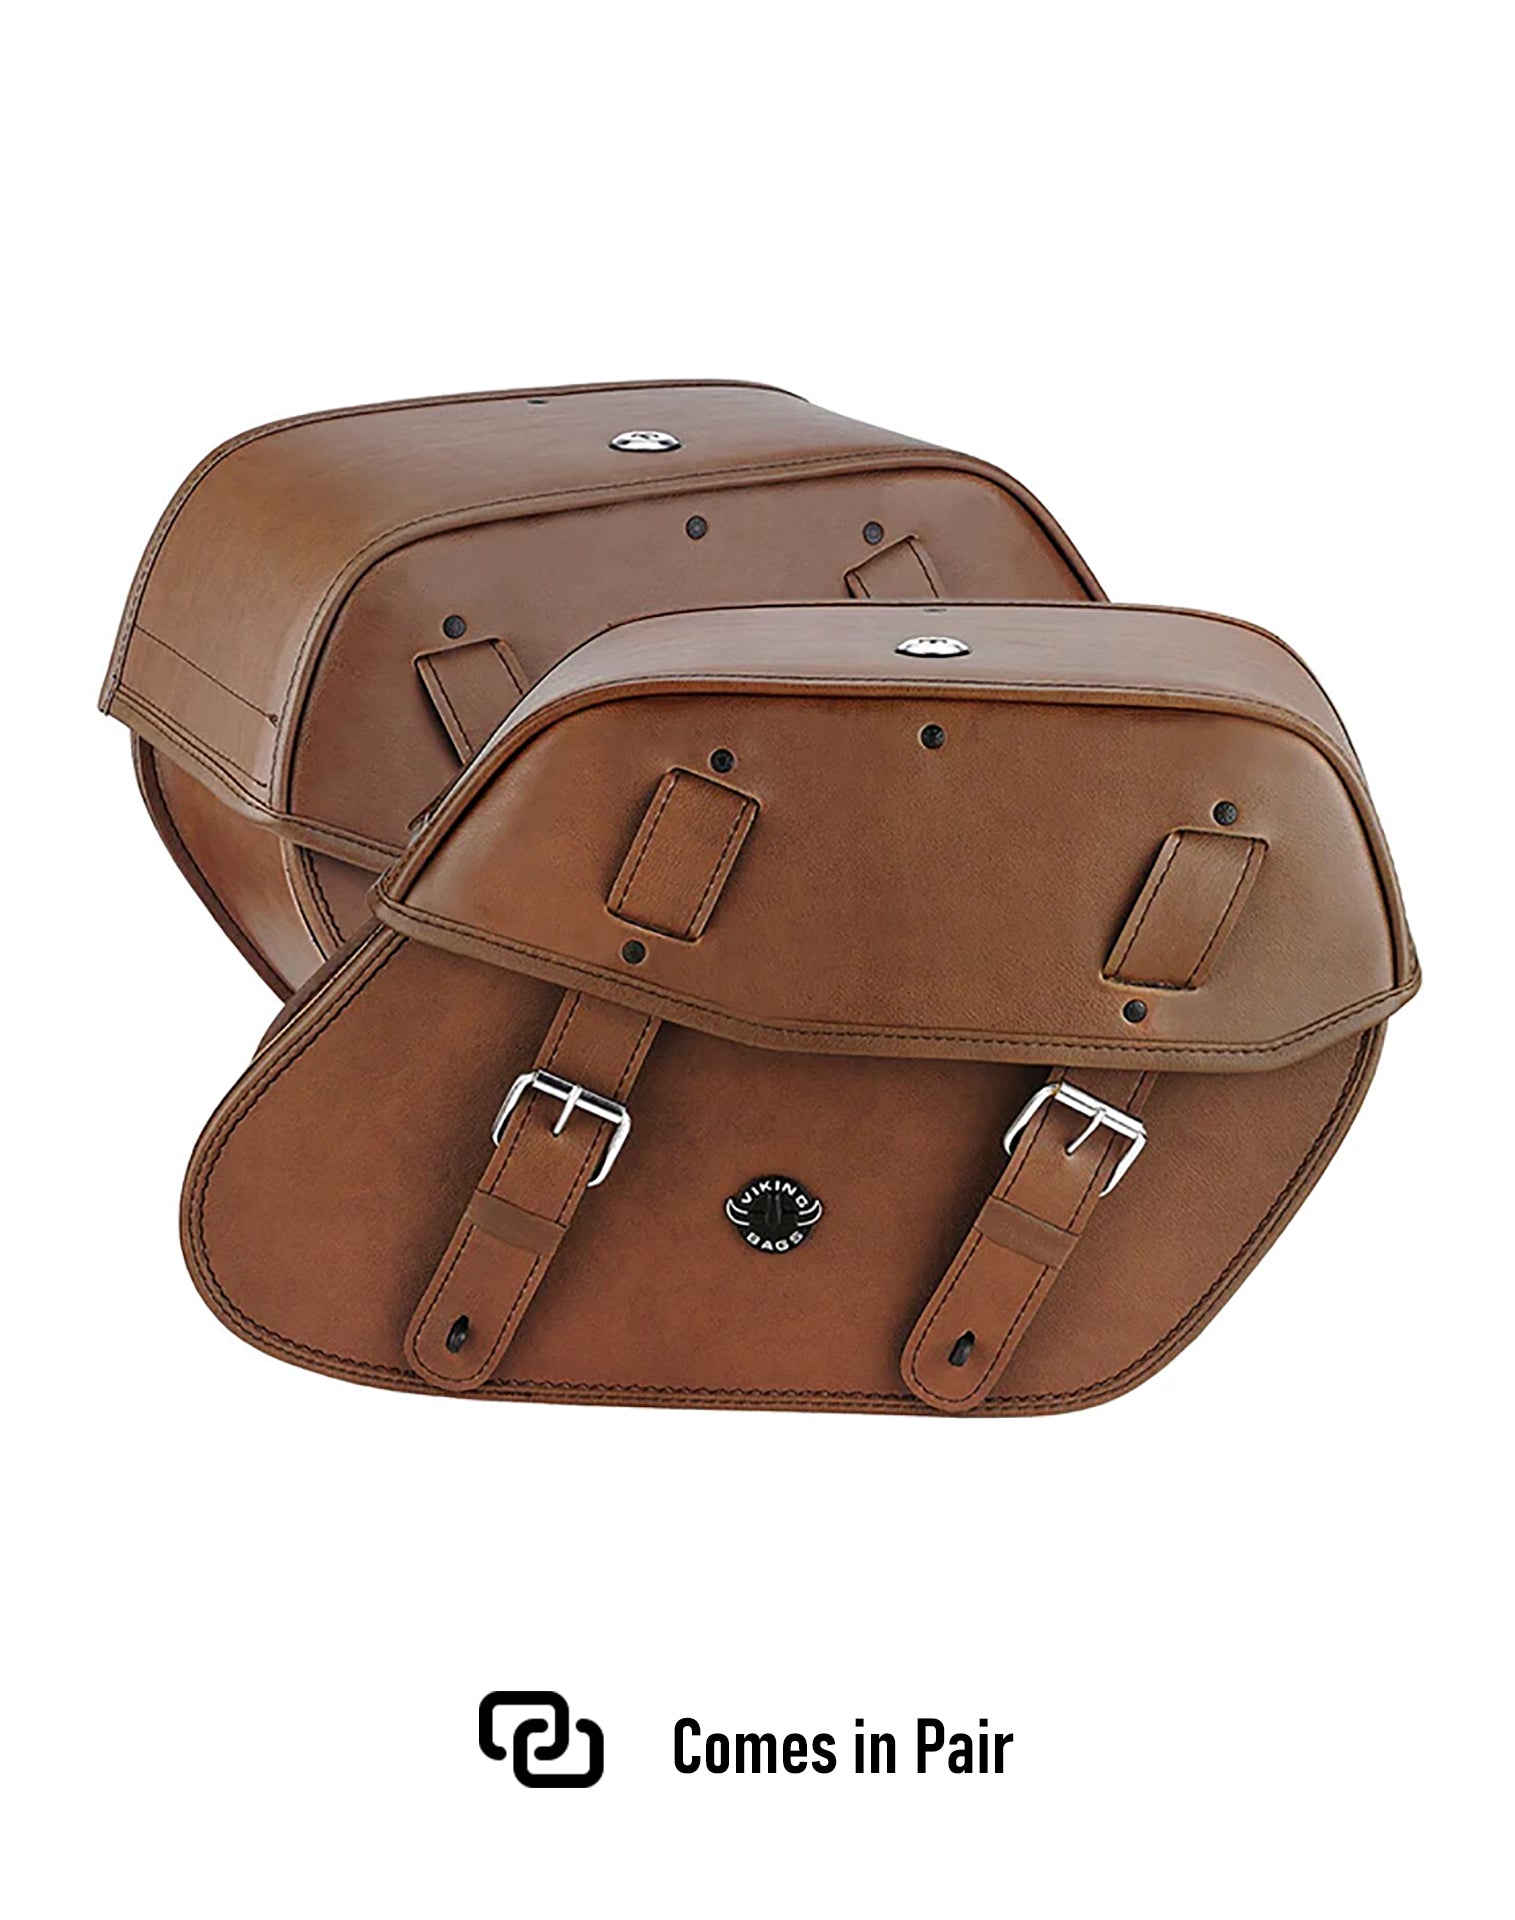 Viking Odin Brown Large Leather Motorcycle Saddlebags For Harley Softail Fat Boy Lo Flstfb Weather Resistant Bags Comes in Pair